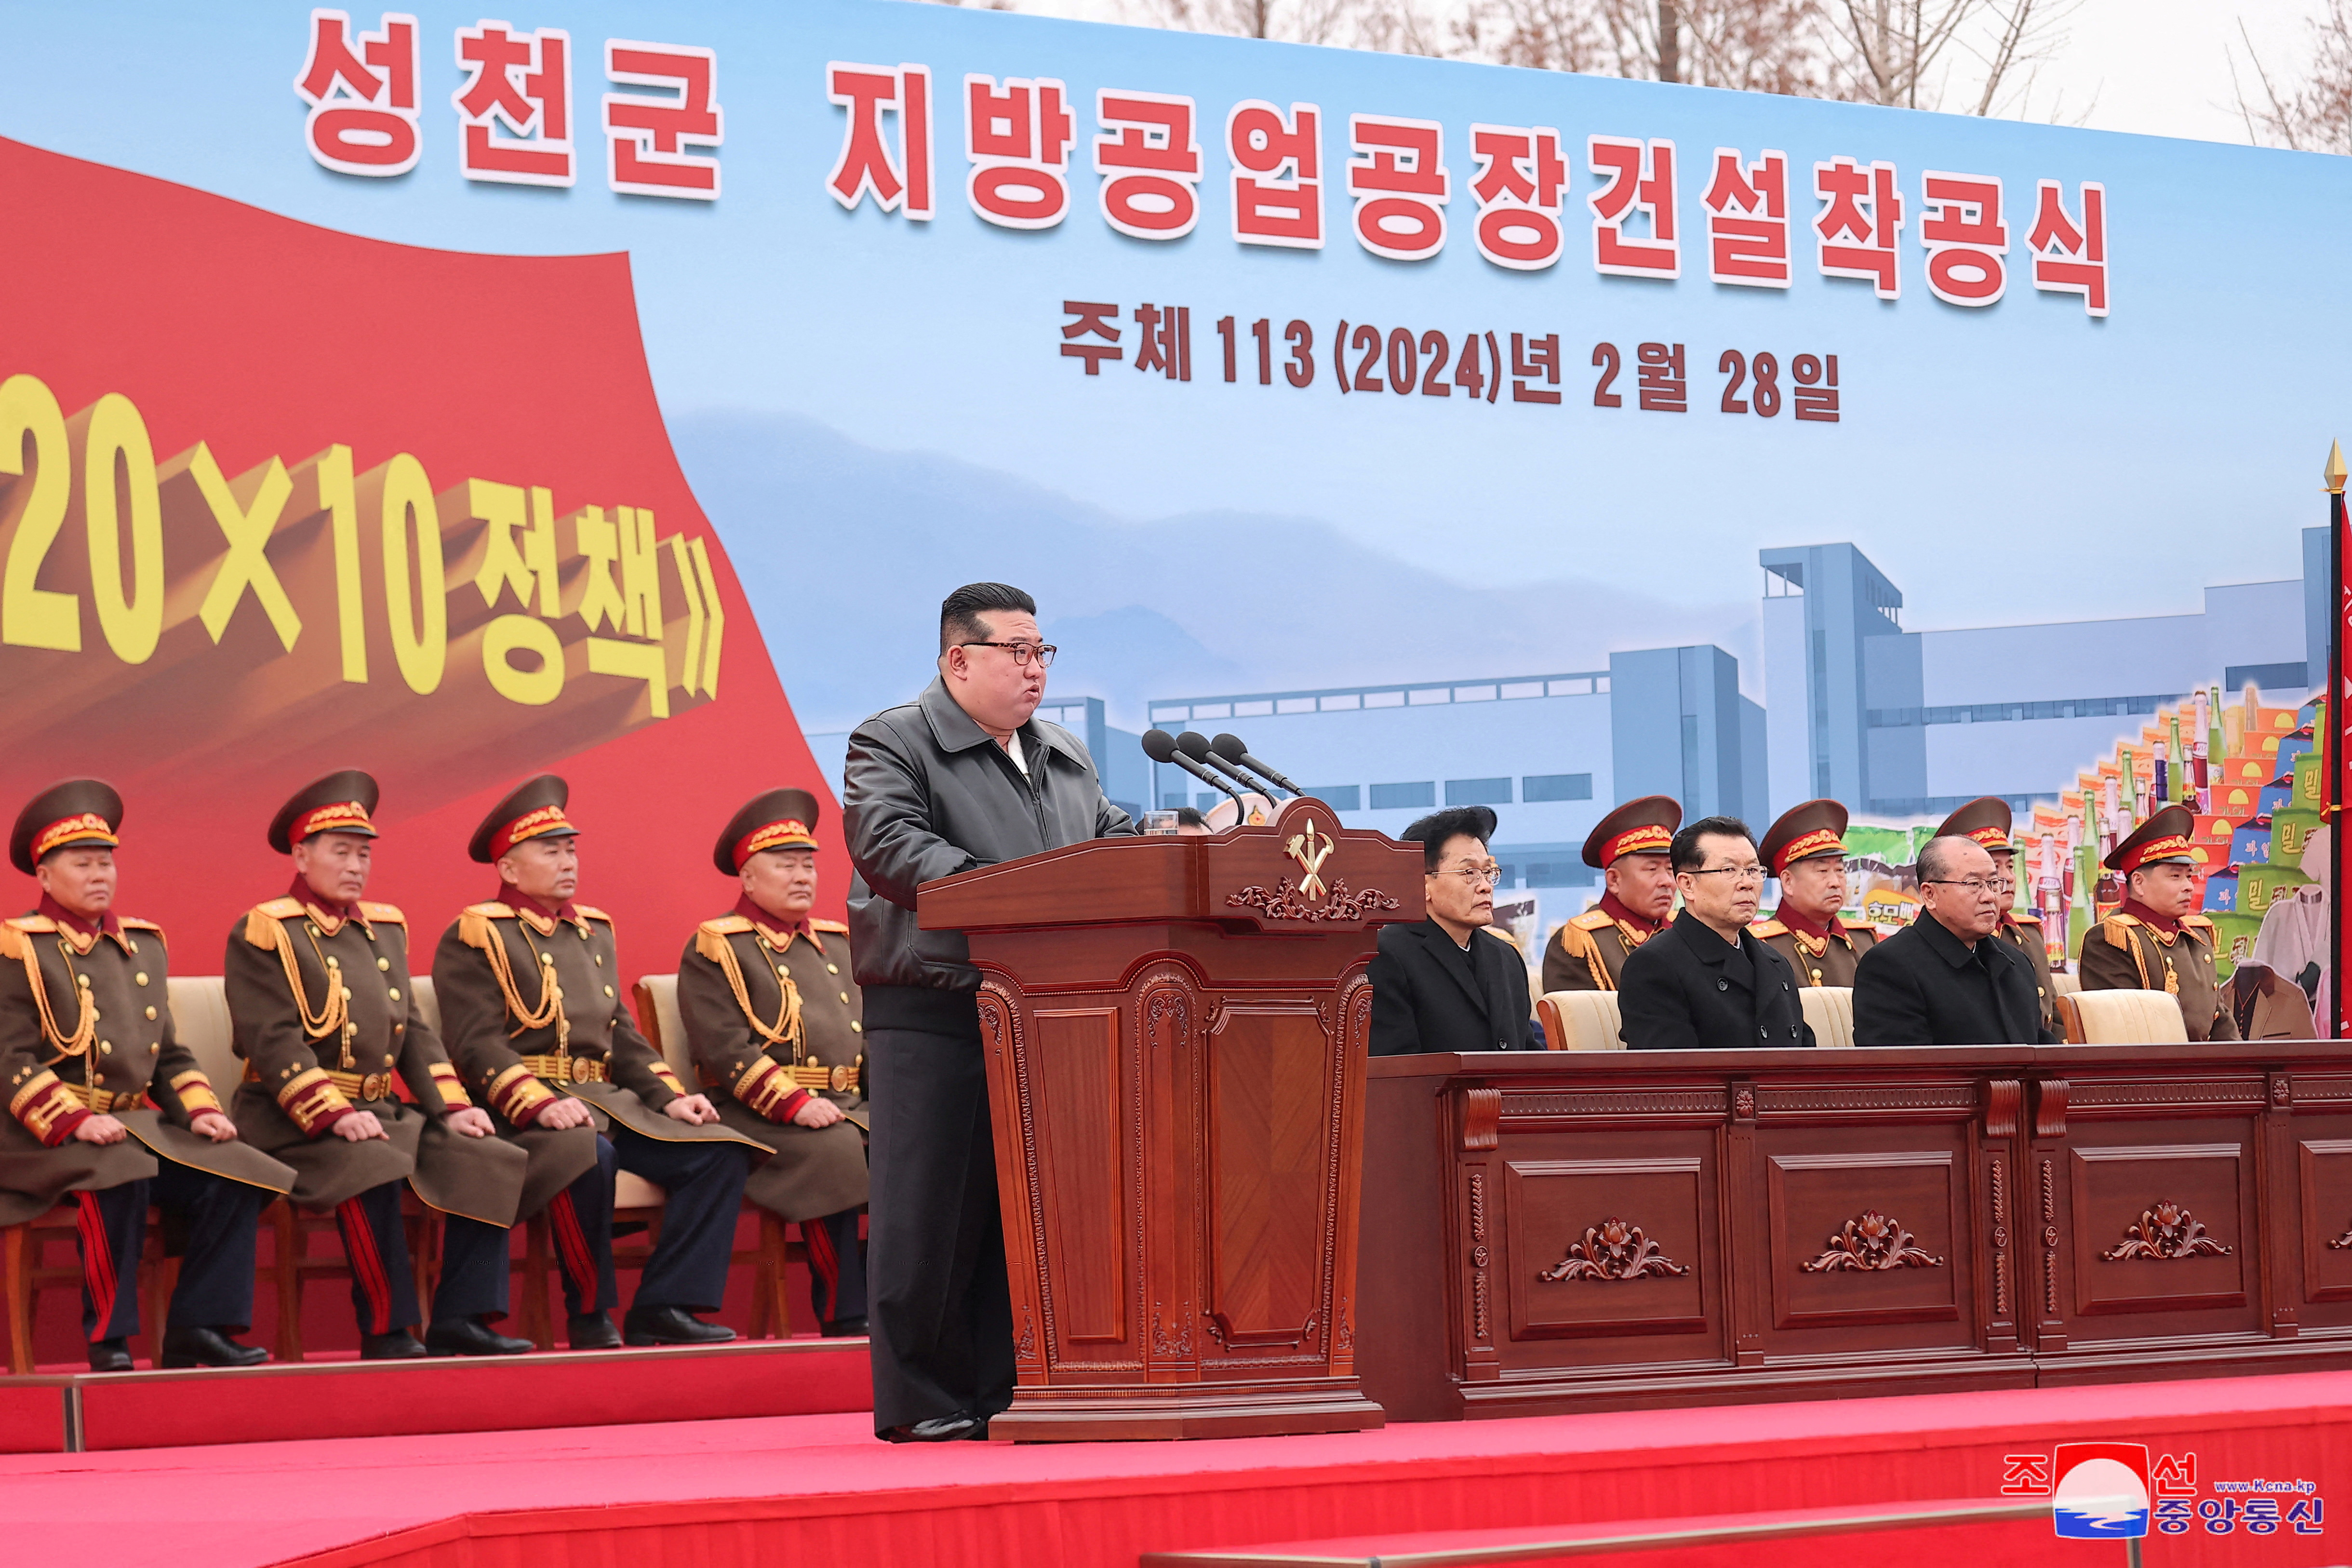 North Korean leader Kim Jong Un attends the groundbreaking ceremony for the construction of a factory in Songchon County